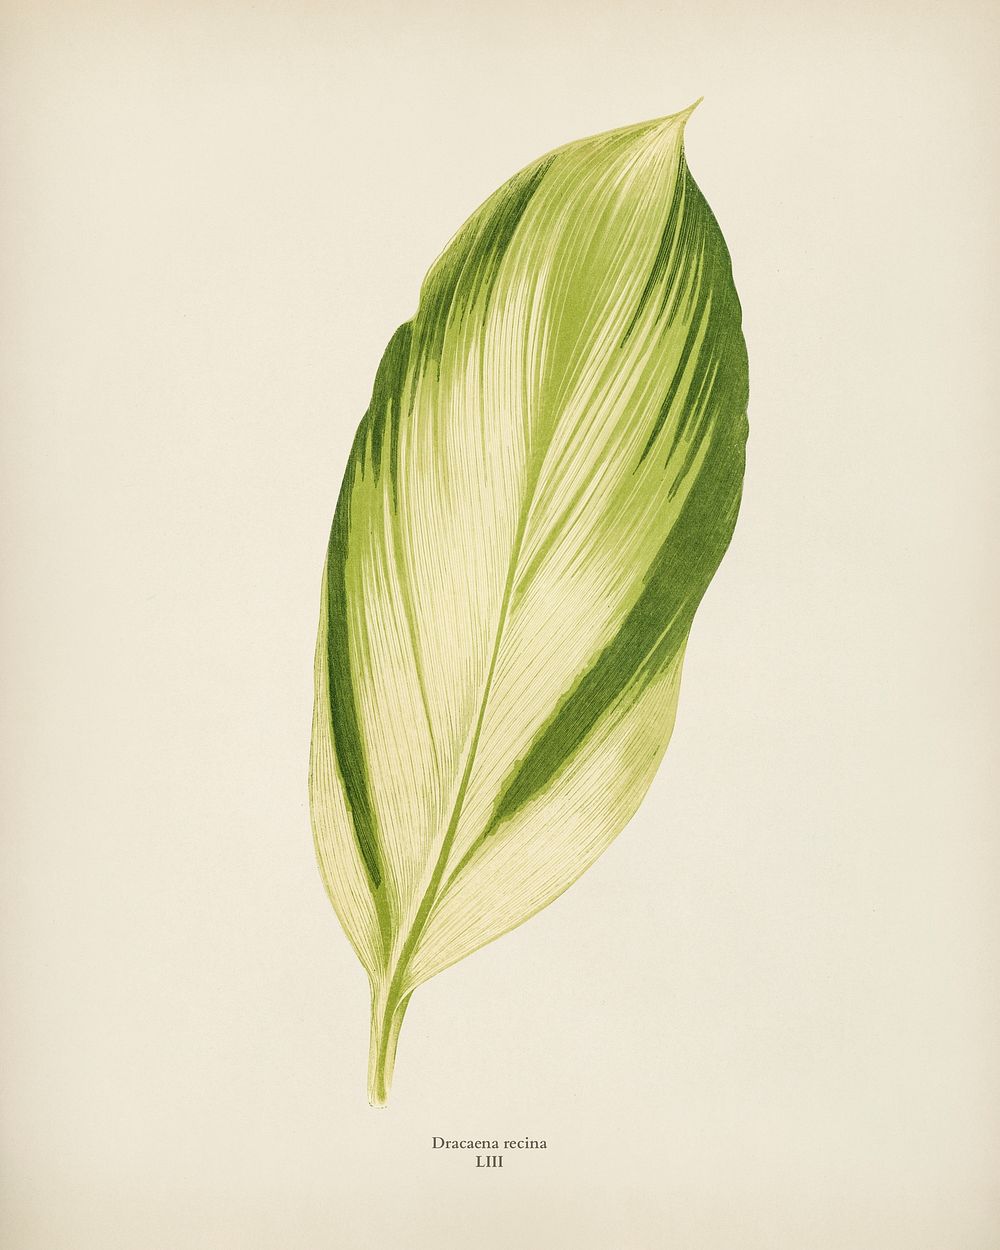 Dracaena recina engraved by Benjamin Fawcett (1808-1893) for Shirley Hibberd&rsquo;s (1825-1890) New and Rare Beautiful…